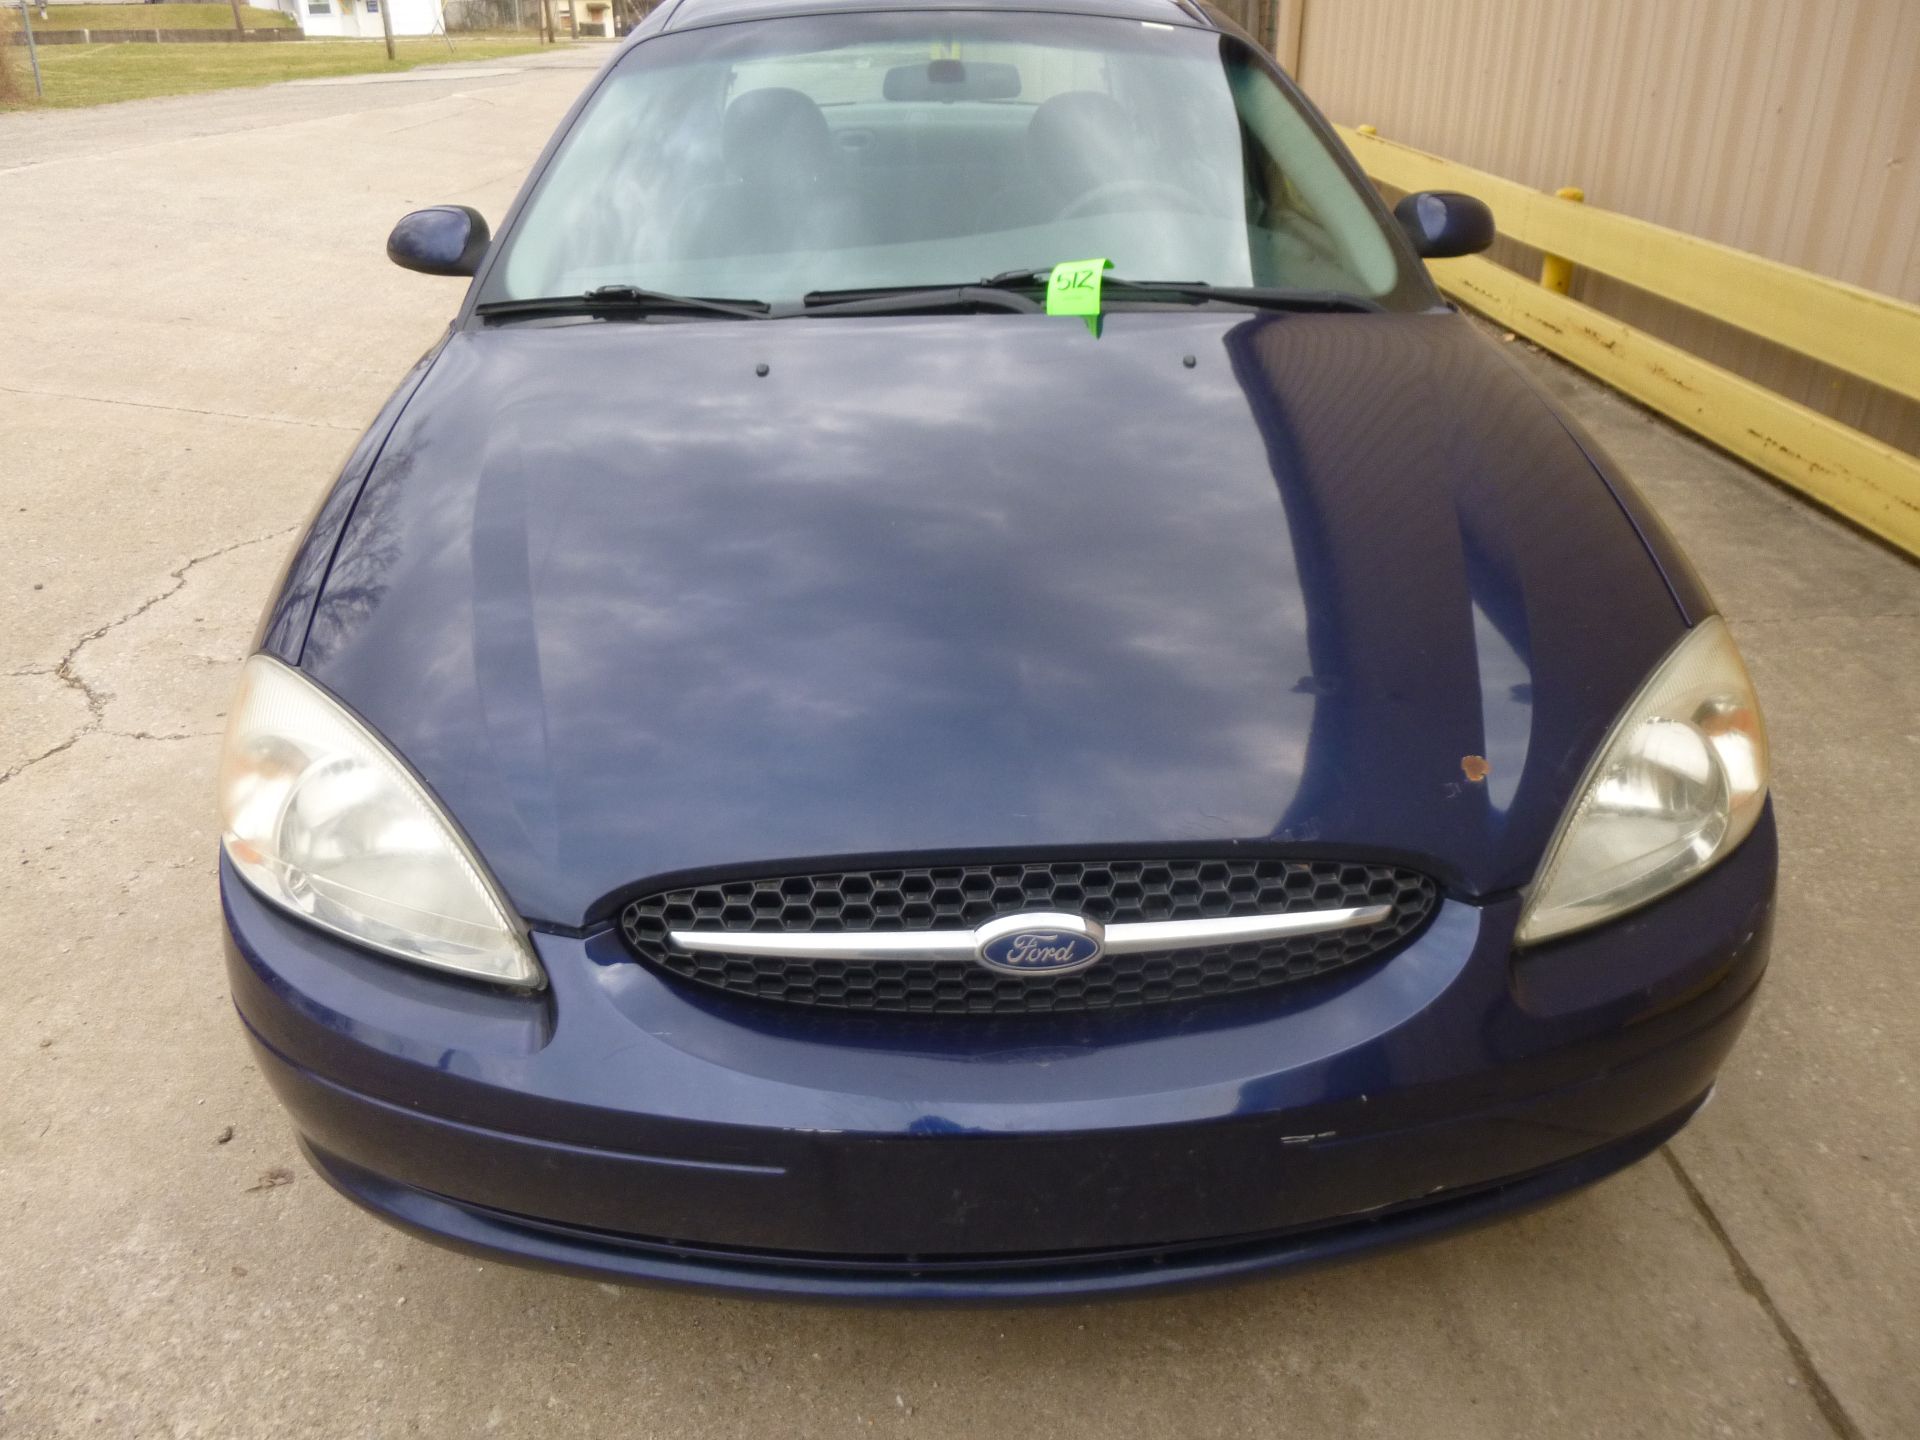 2002 Ford Taurus Municipally maintained Miles 92930 Vin # 1FAFP532X2G180779 CLEAR TITLE(located at - Image 3 of 12